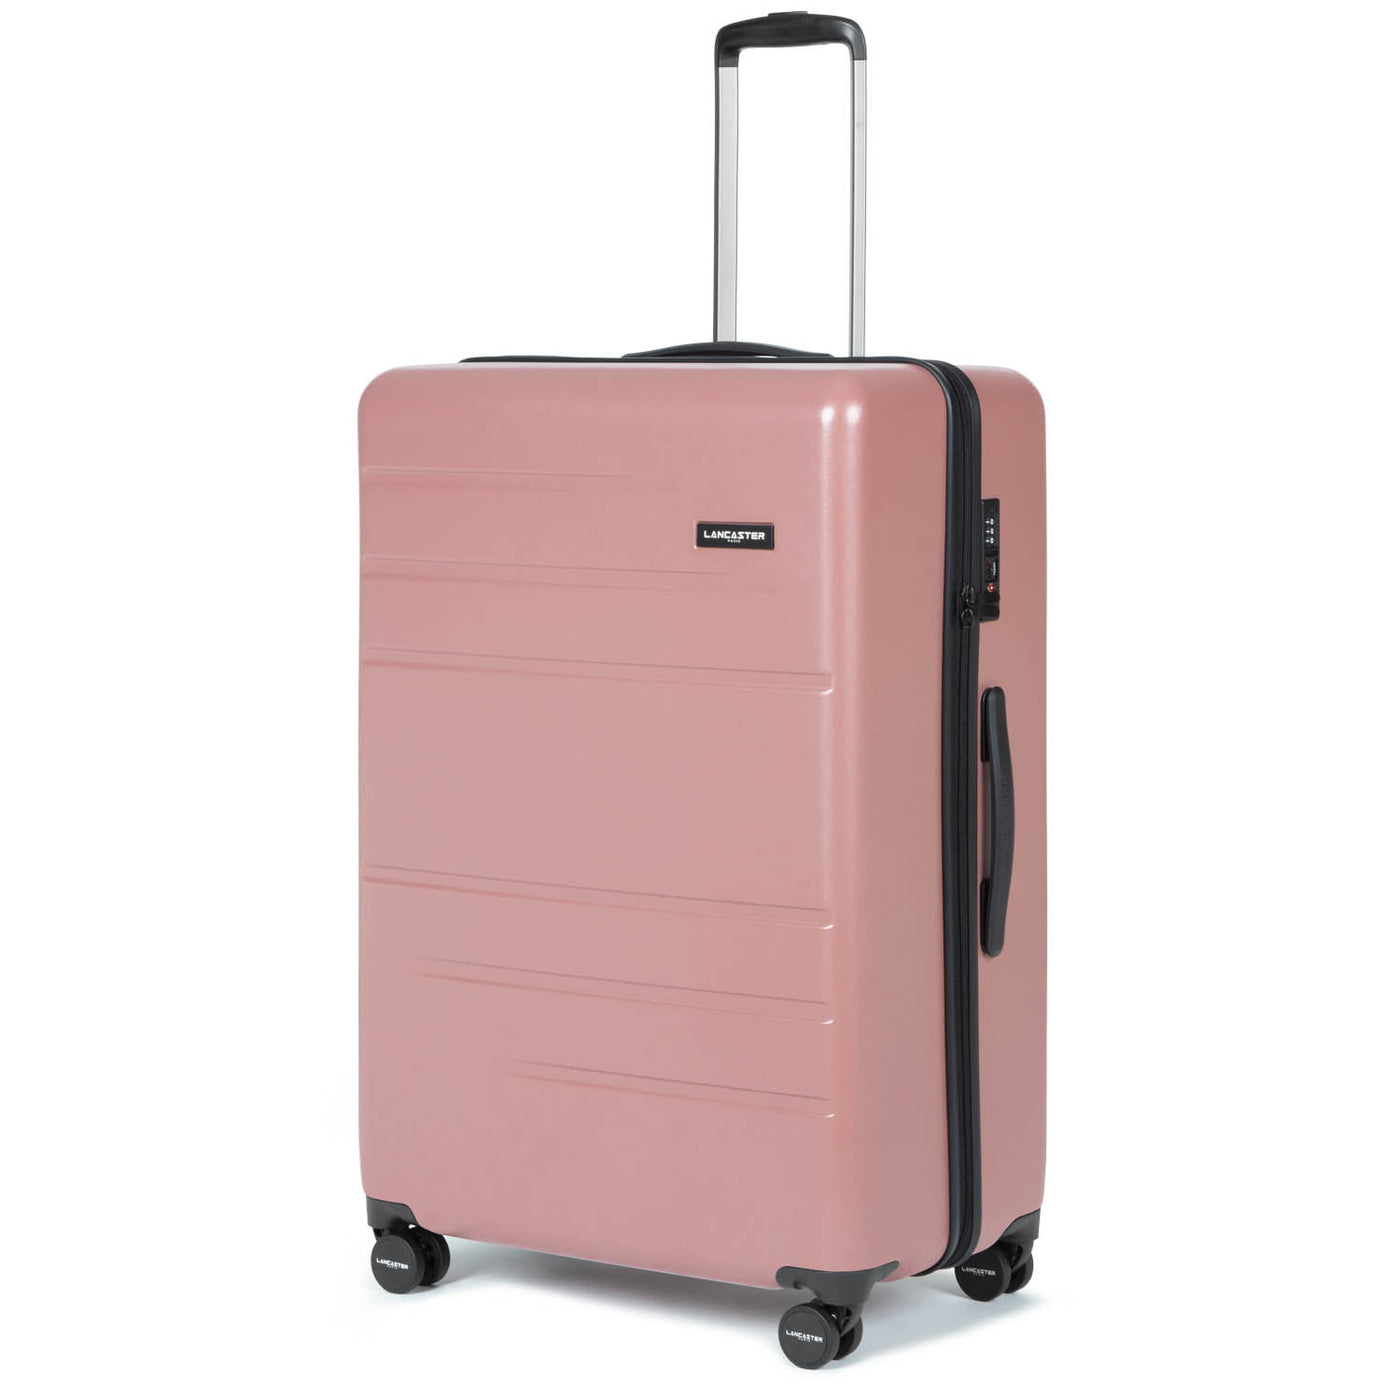 Valise soute - Bagages  #couleur_rose-antic